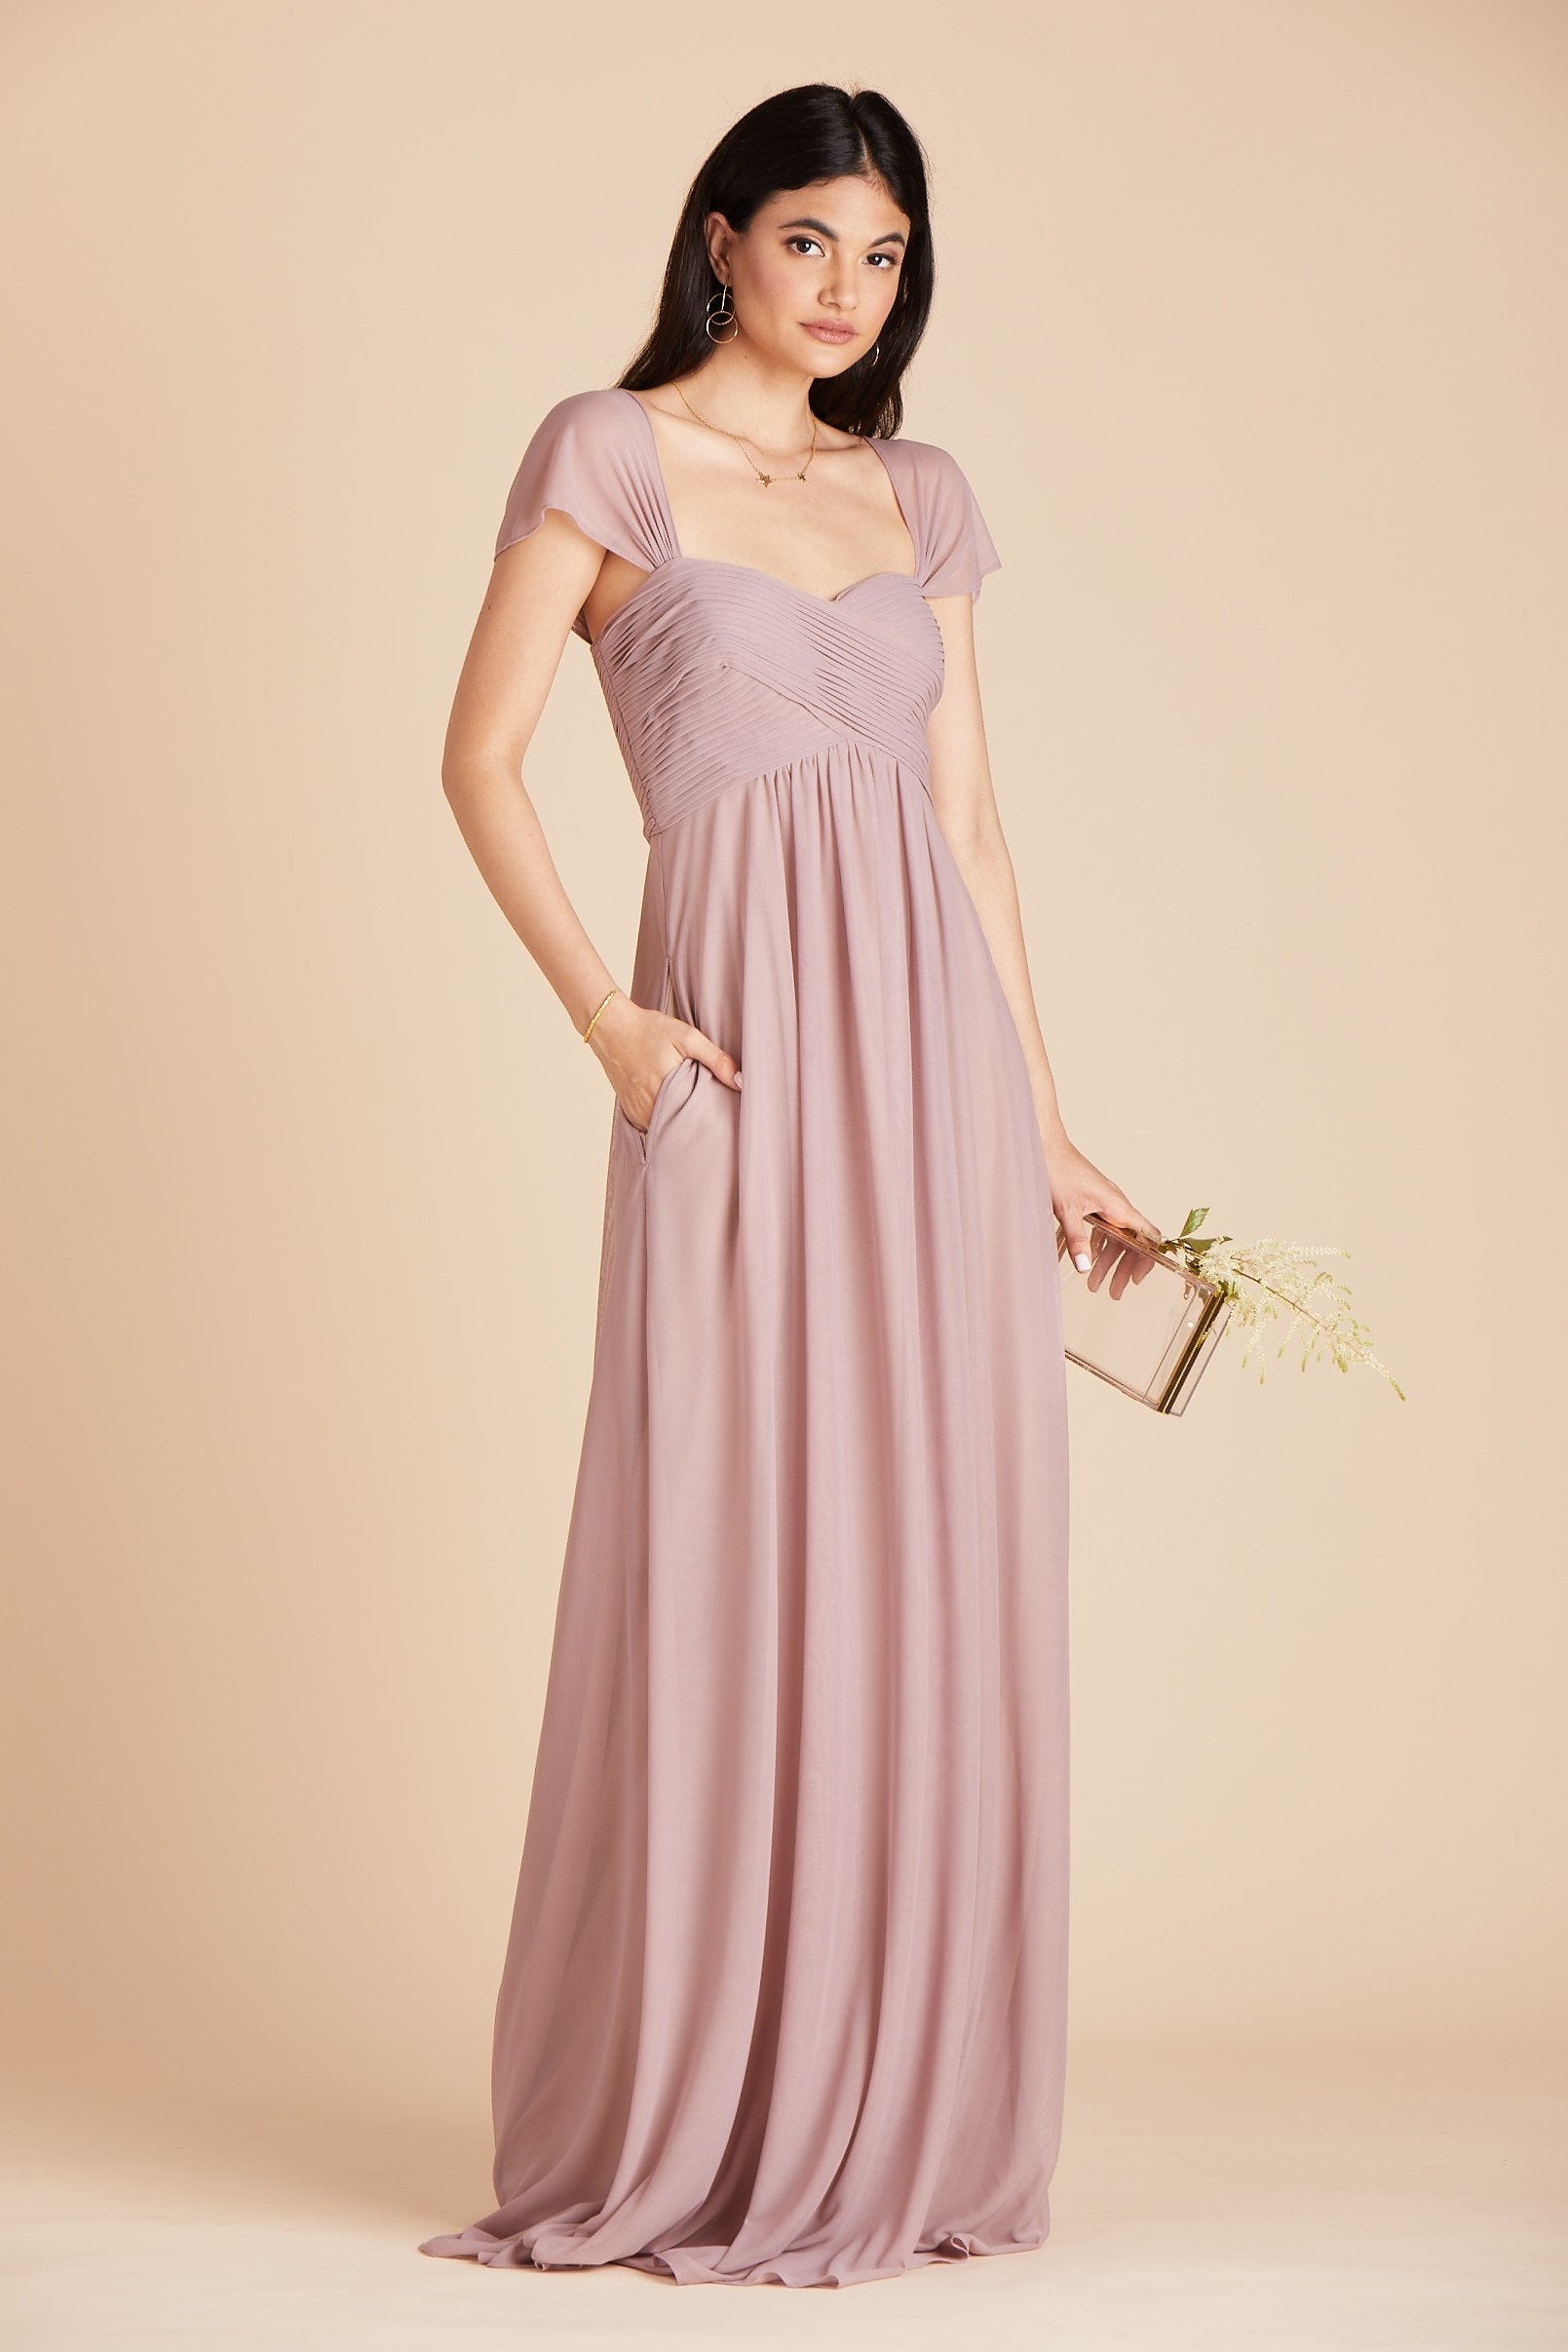 Maria convertible bridesmaids dress in mauve chiffon by Birdy Grey, front view with hand in pocket